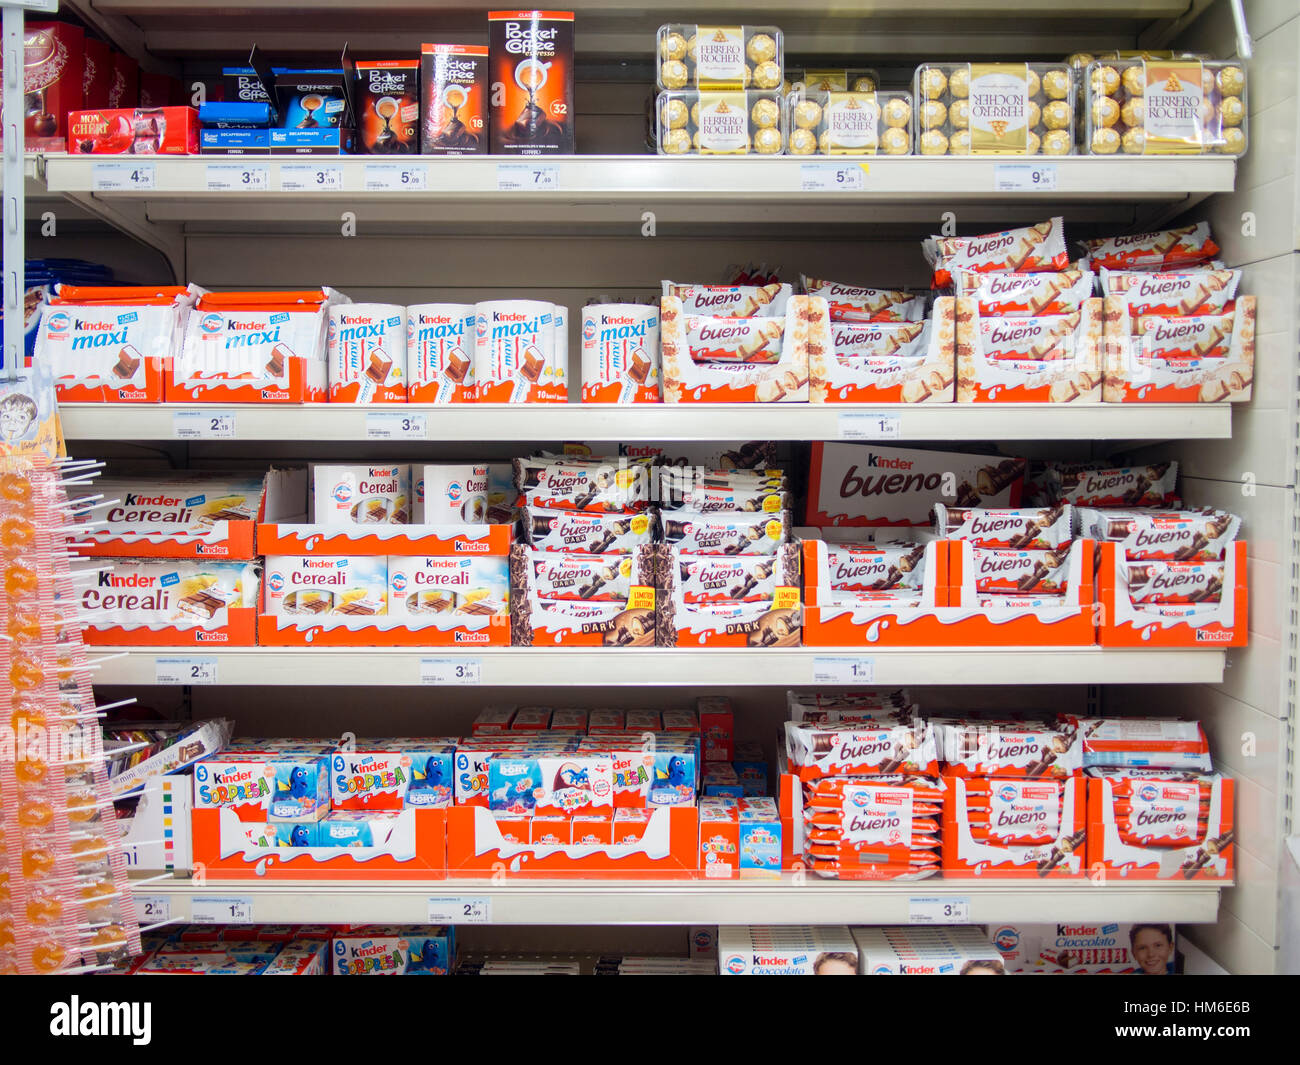 Kinder Ferrero products at the Carrefour Market store, Cremona, Italy Stock  Photo - Alamy